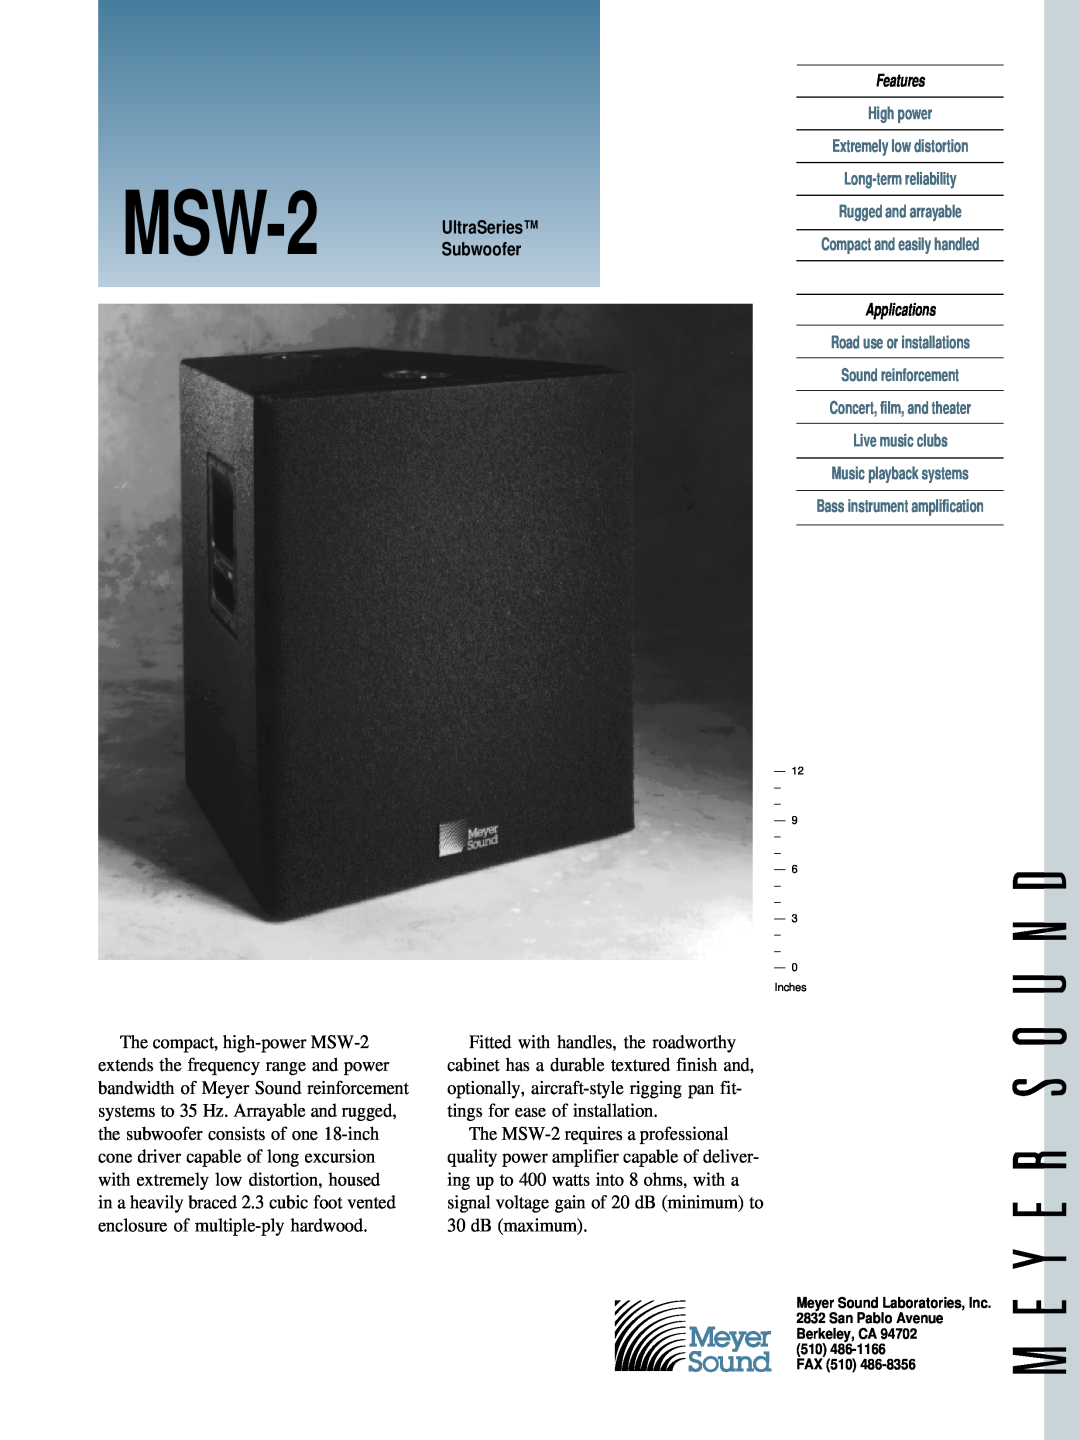 Meyer Sound manual MSW-2 UltraSeries Subwoofer, Features, Applications 